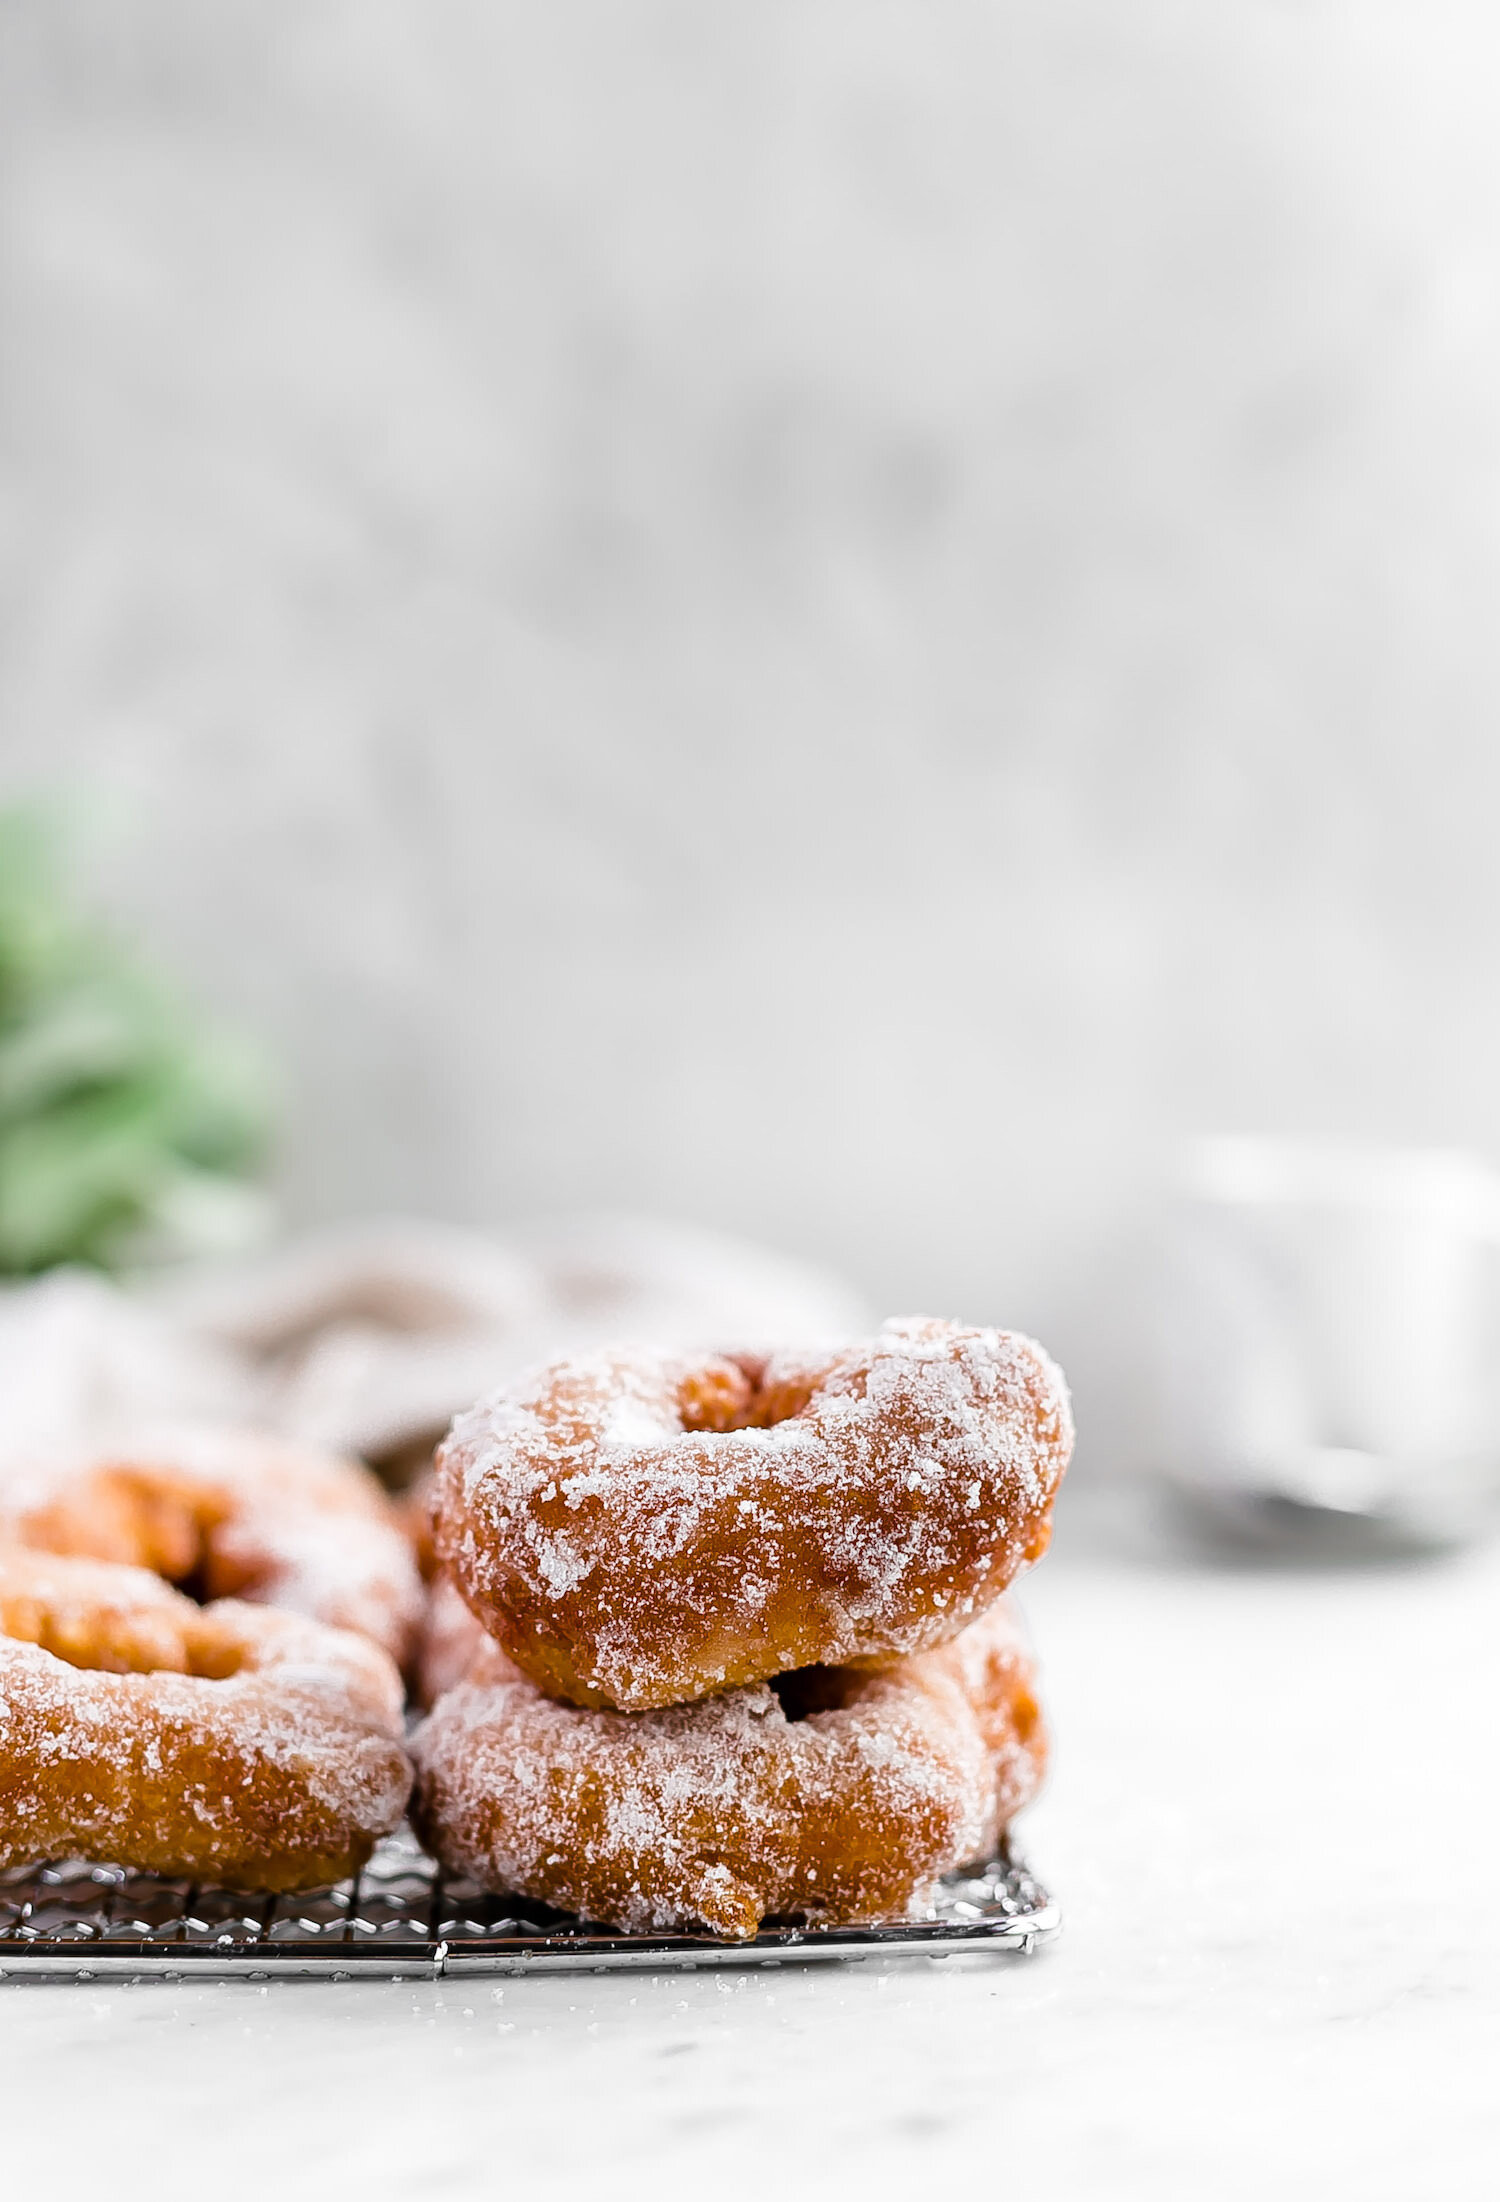 Moroccan Sfinge Donuts | Truffles and Trends